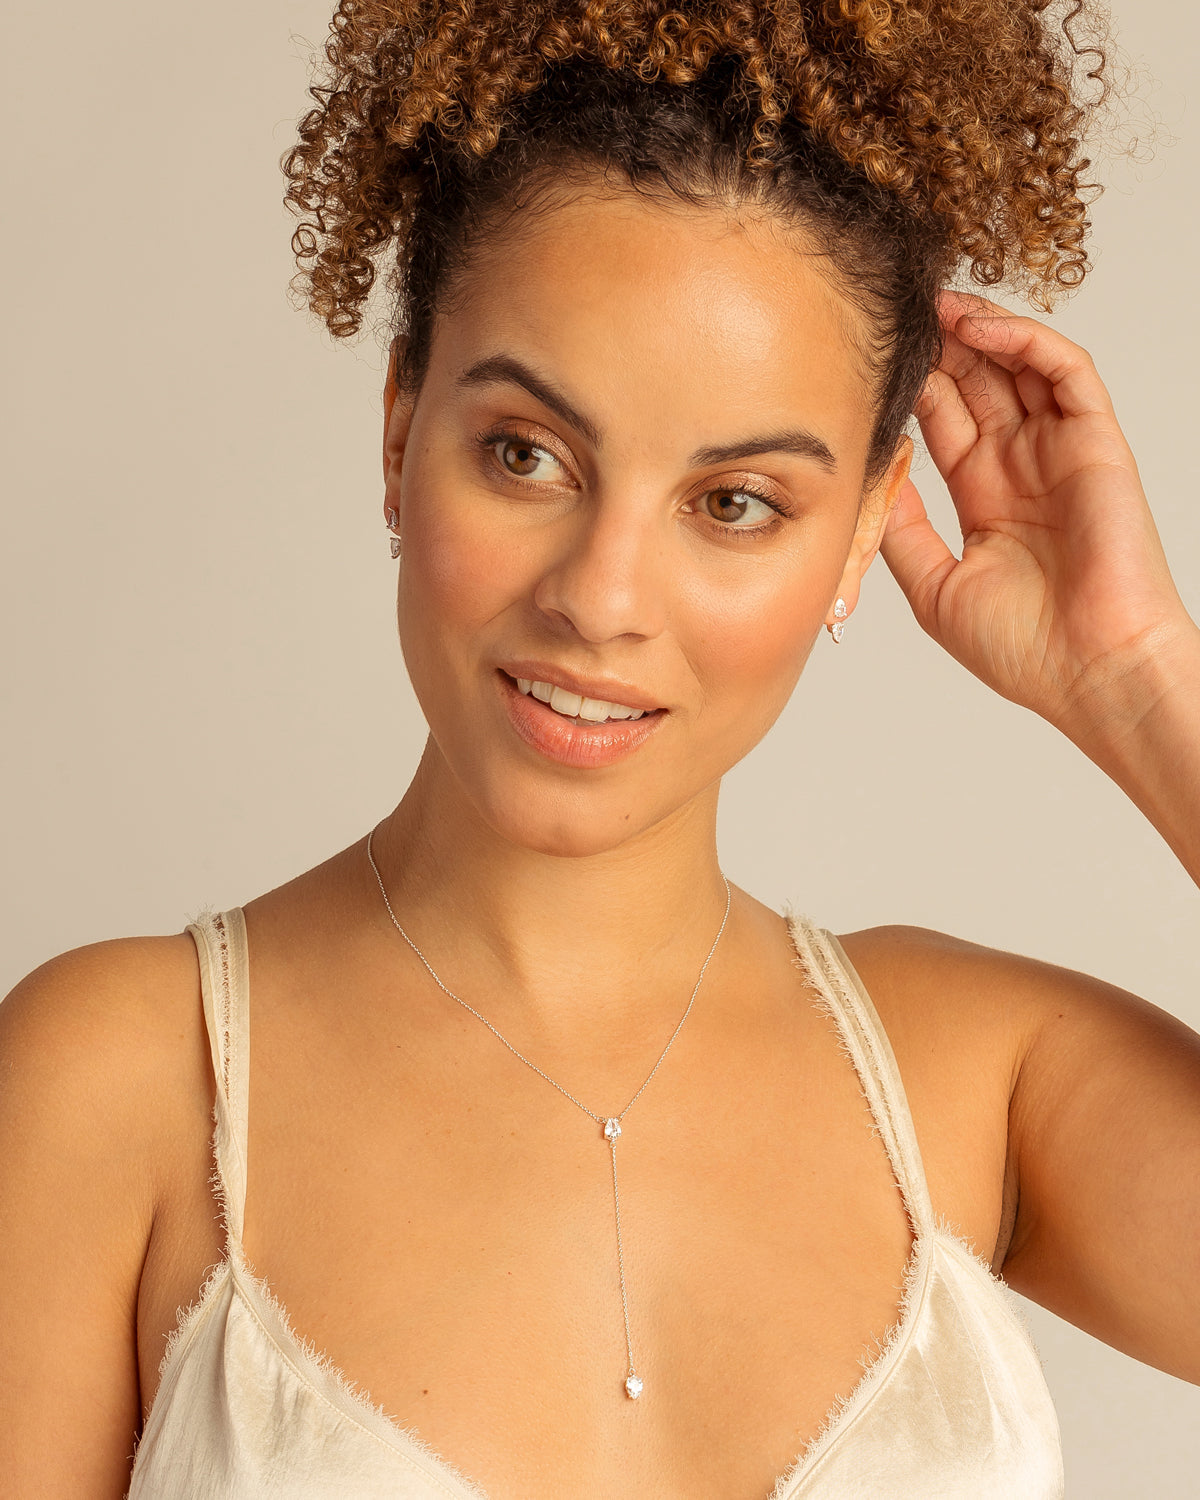 Bryan Anthonys Radiance Collection Pear Cut Lariat Necklace On Model